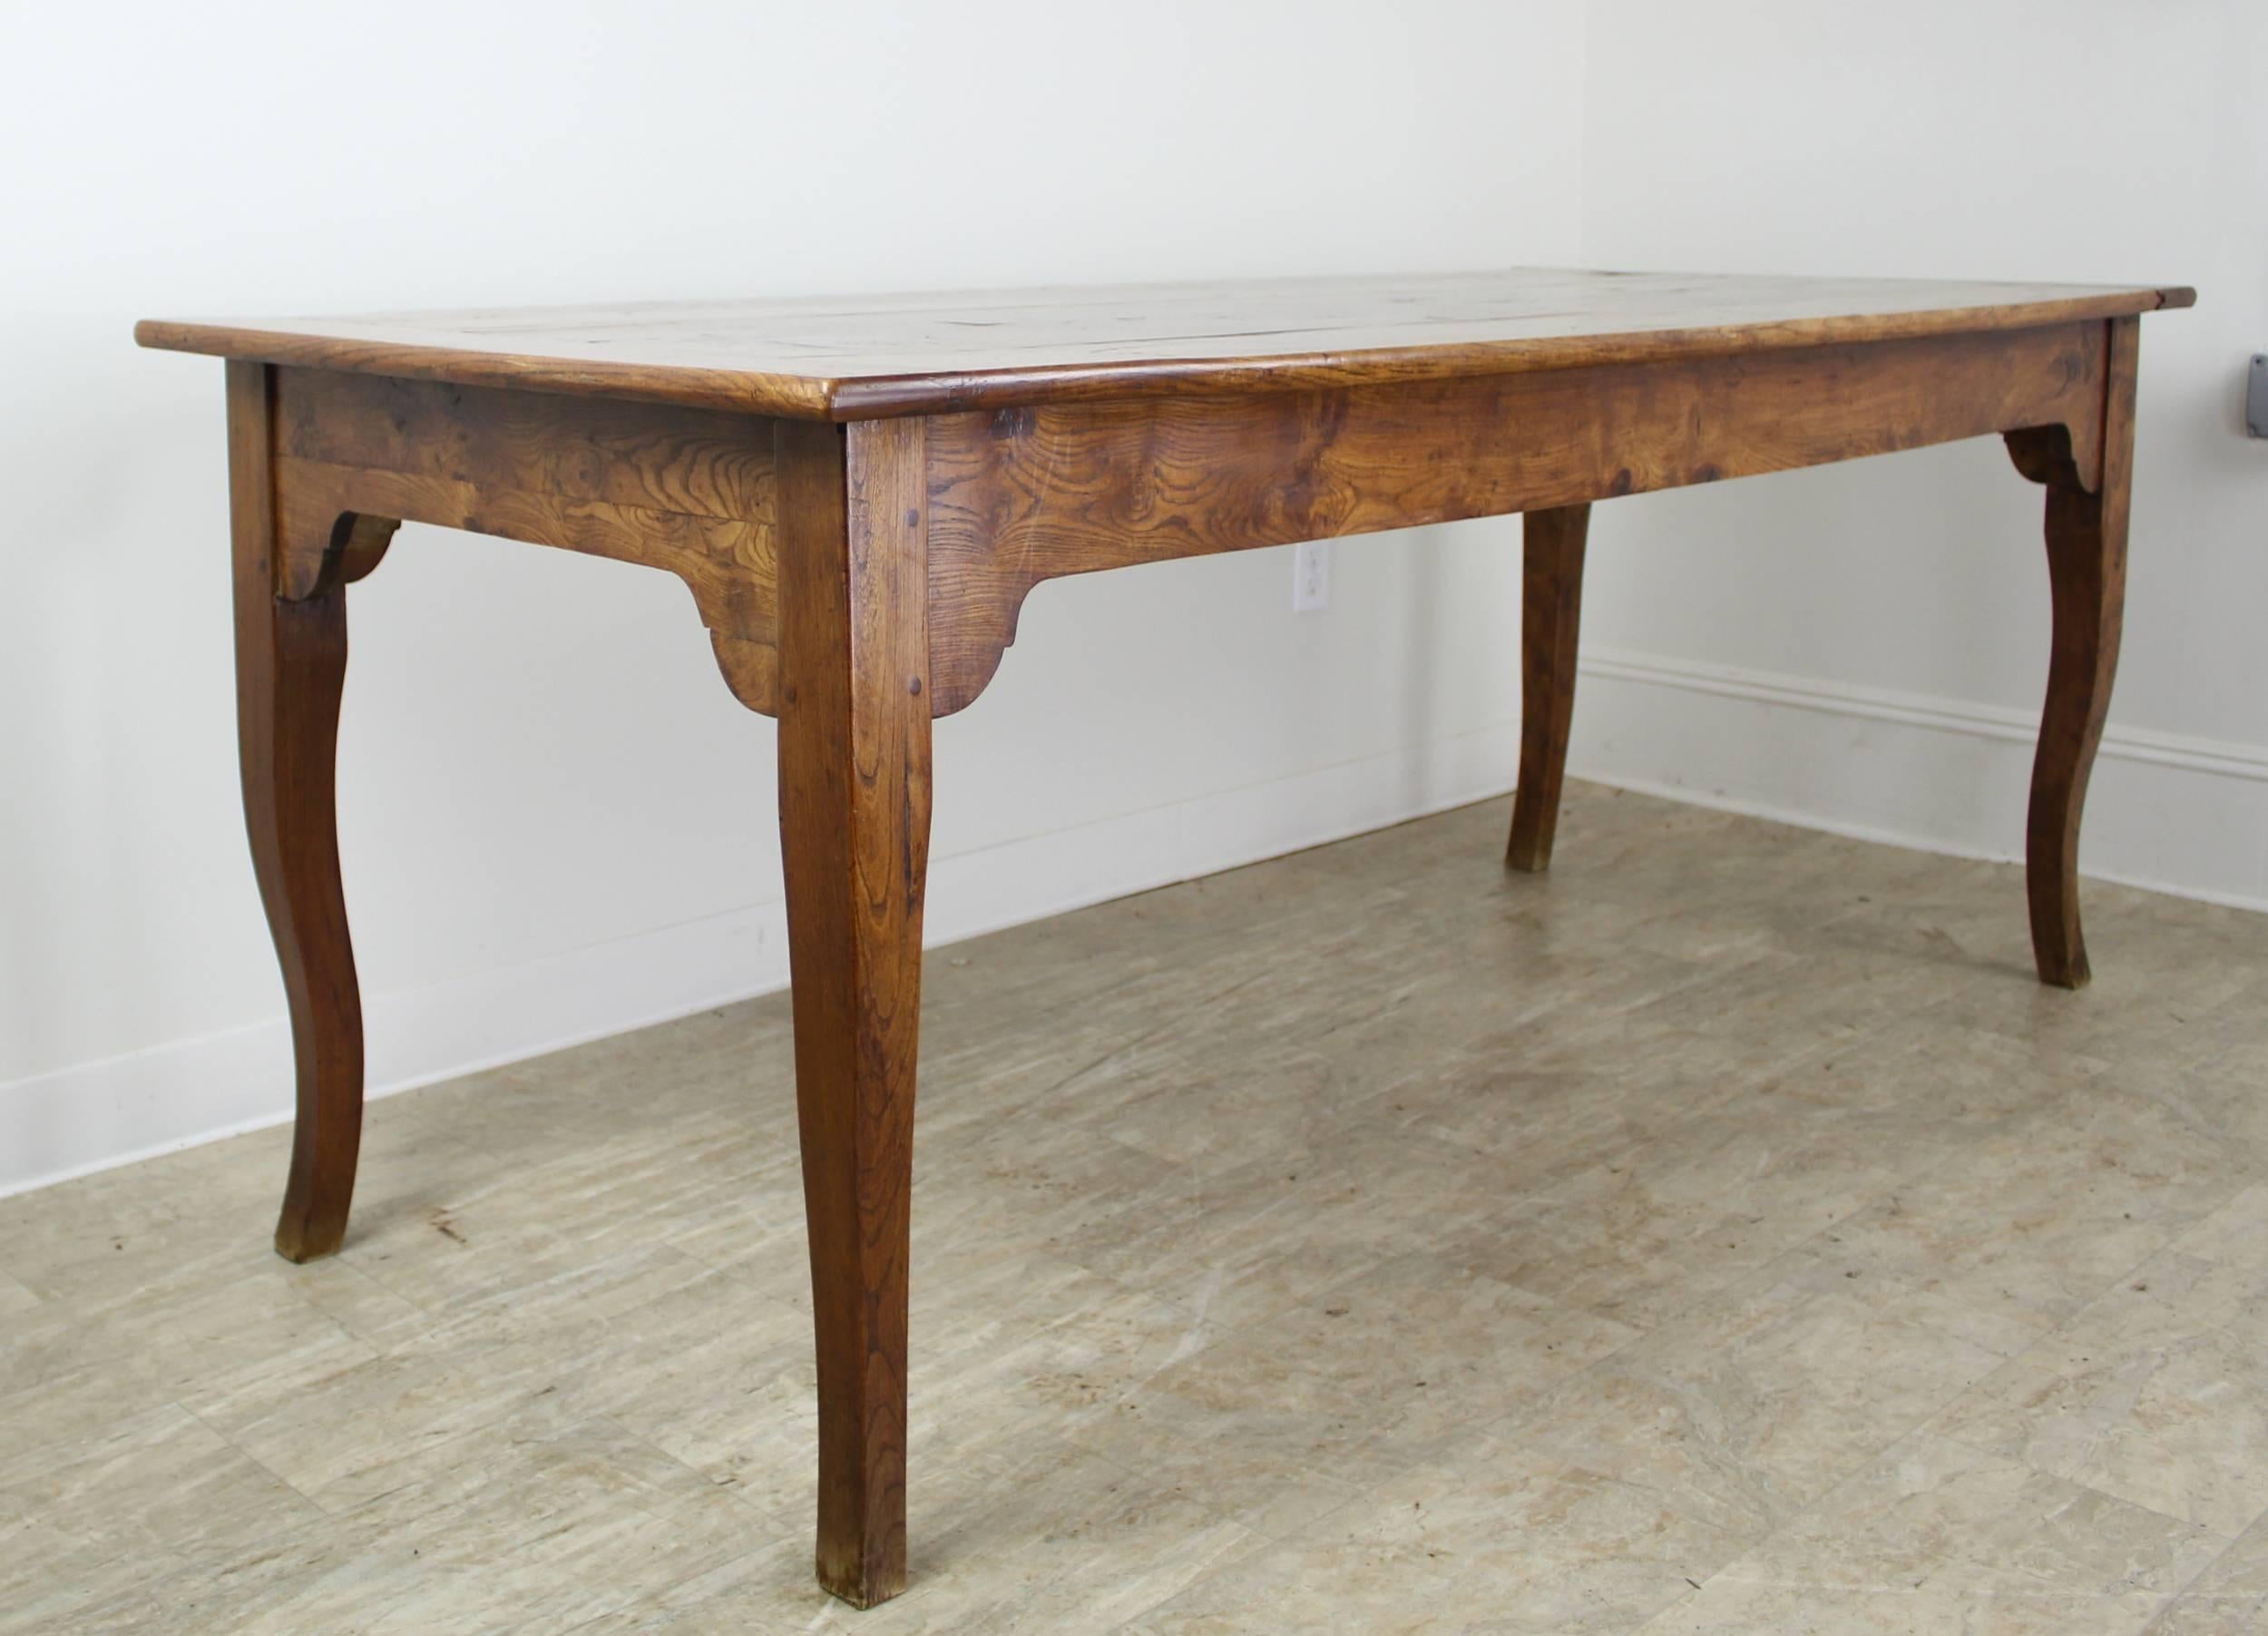 This is a Classic country dining table, more formal than a traditional farm table and made with the most beautifully grained elm we have seen. The lovely profile features graceful legs, breadboards ends on the top, and pretty supports at each